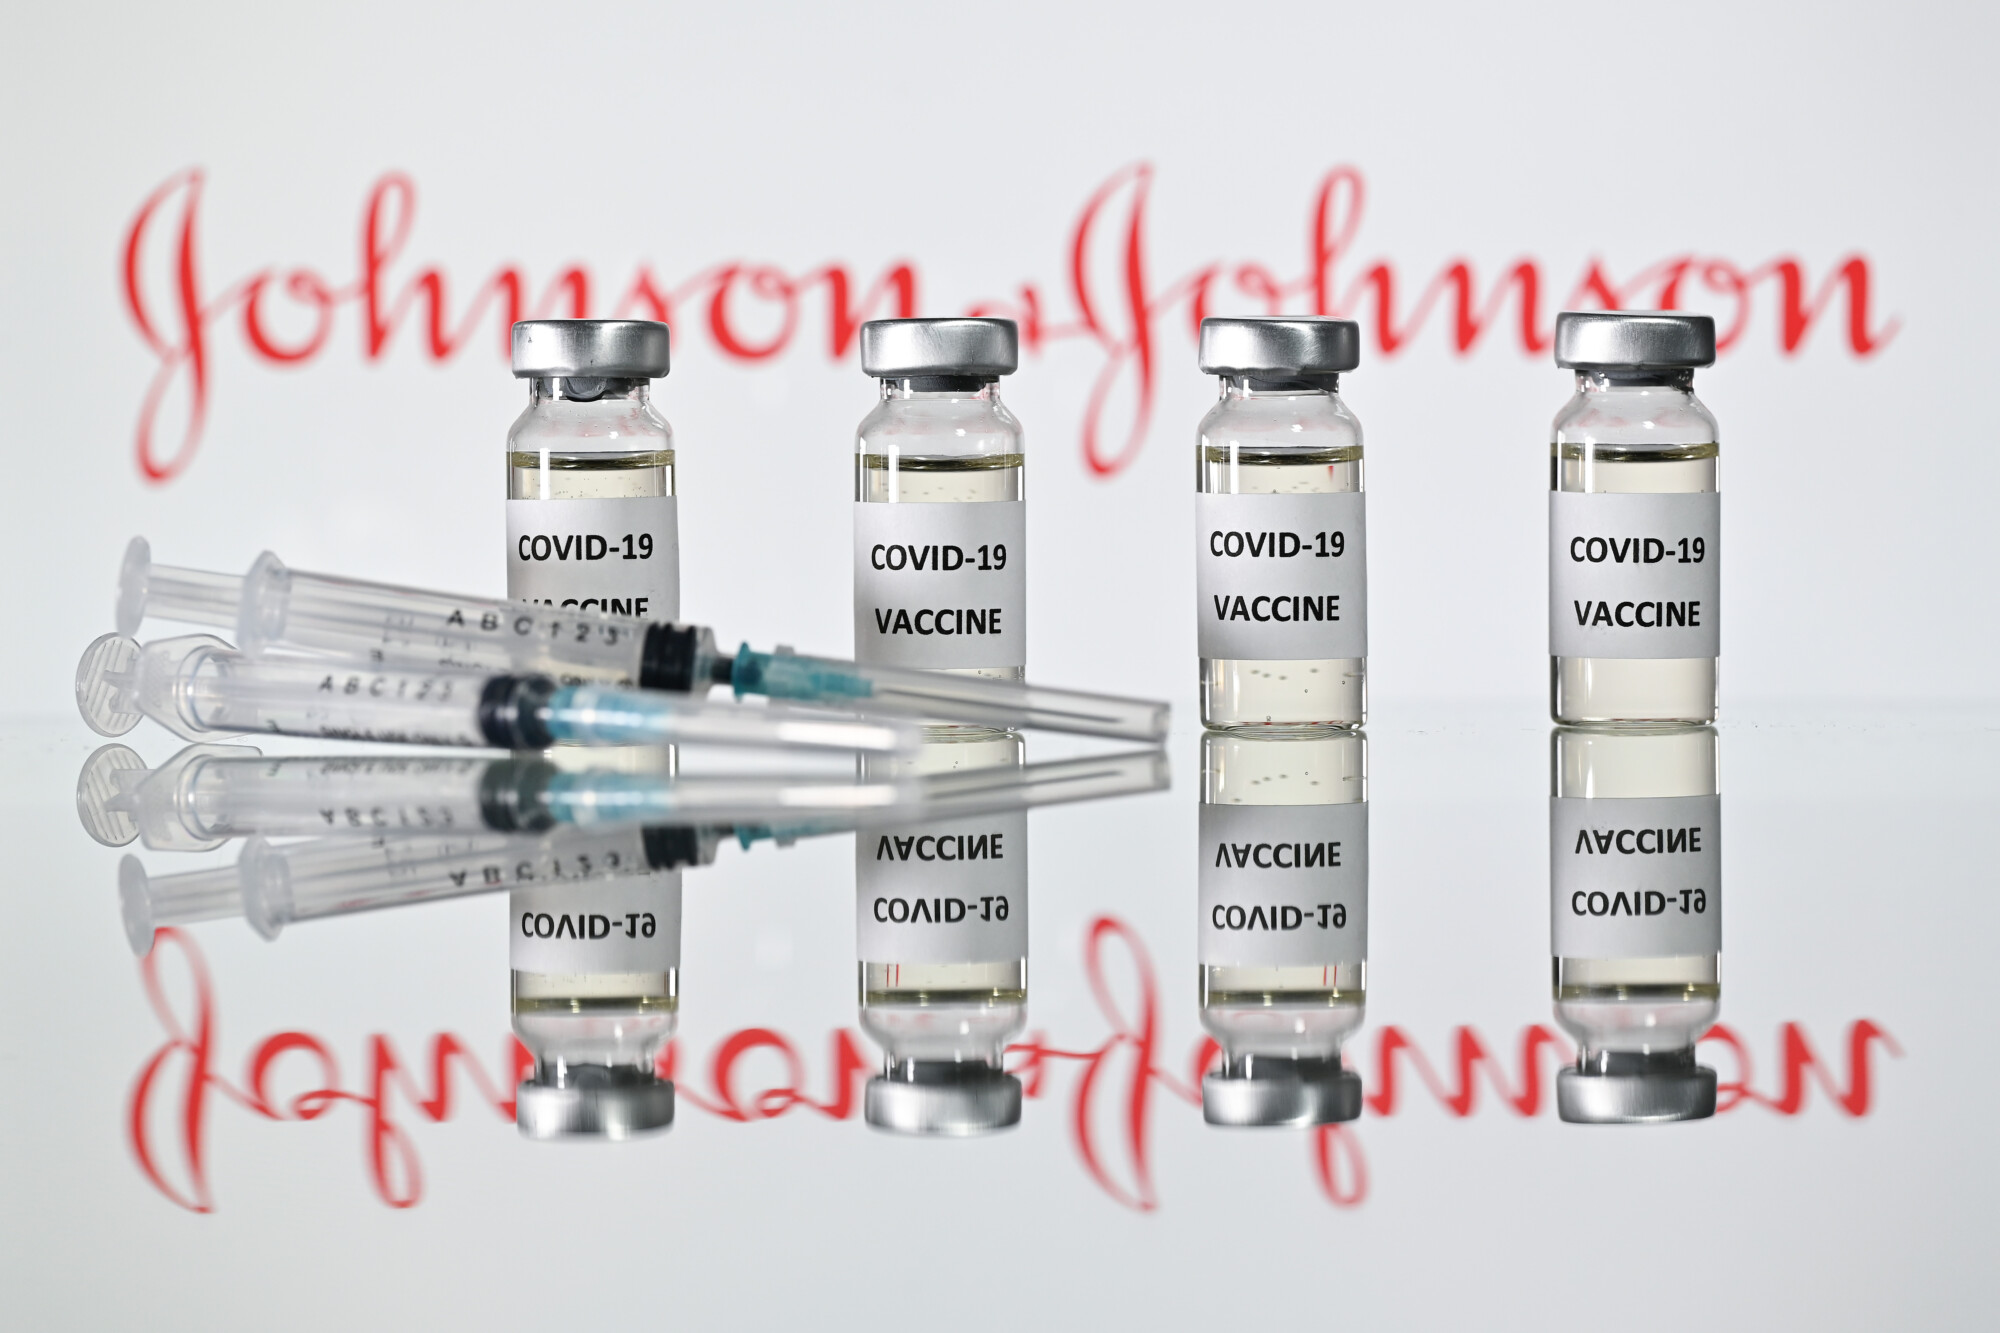 J&J Vaccine Significantly Less Effective Against CCP Virus Variants, Study Suggests